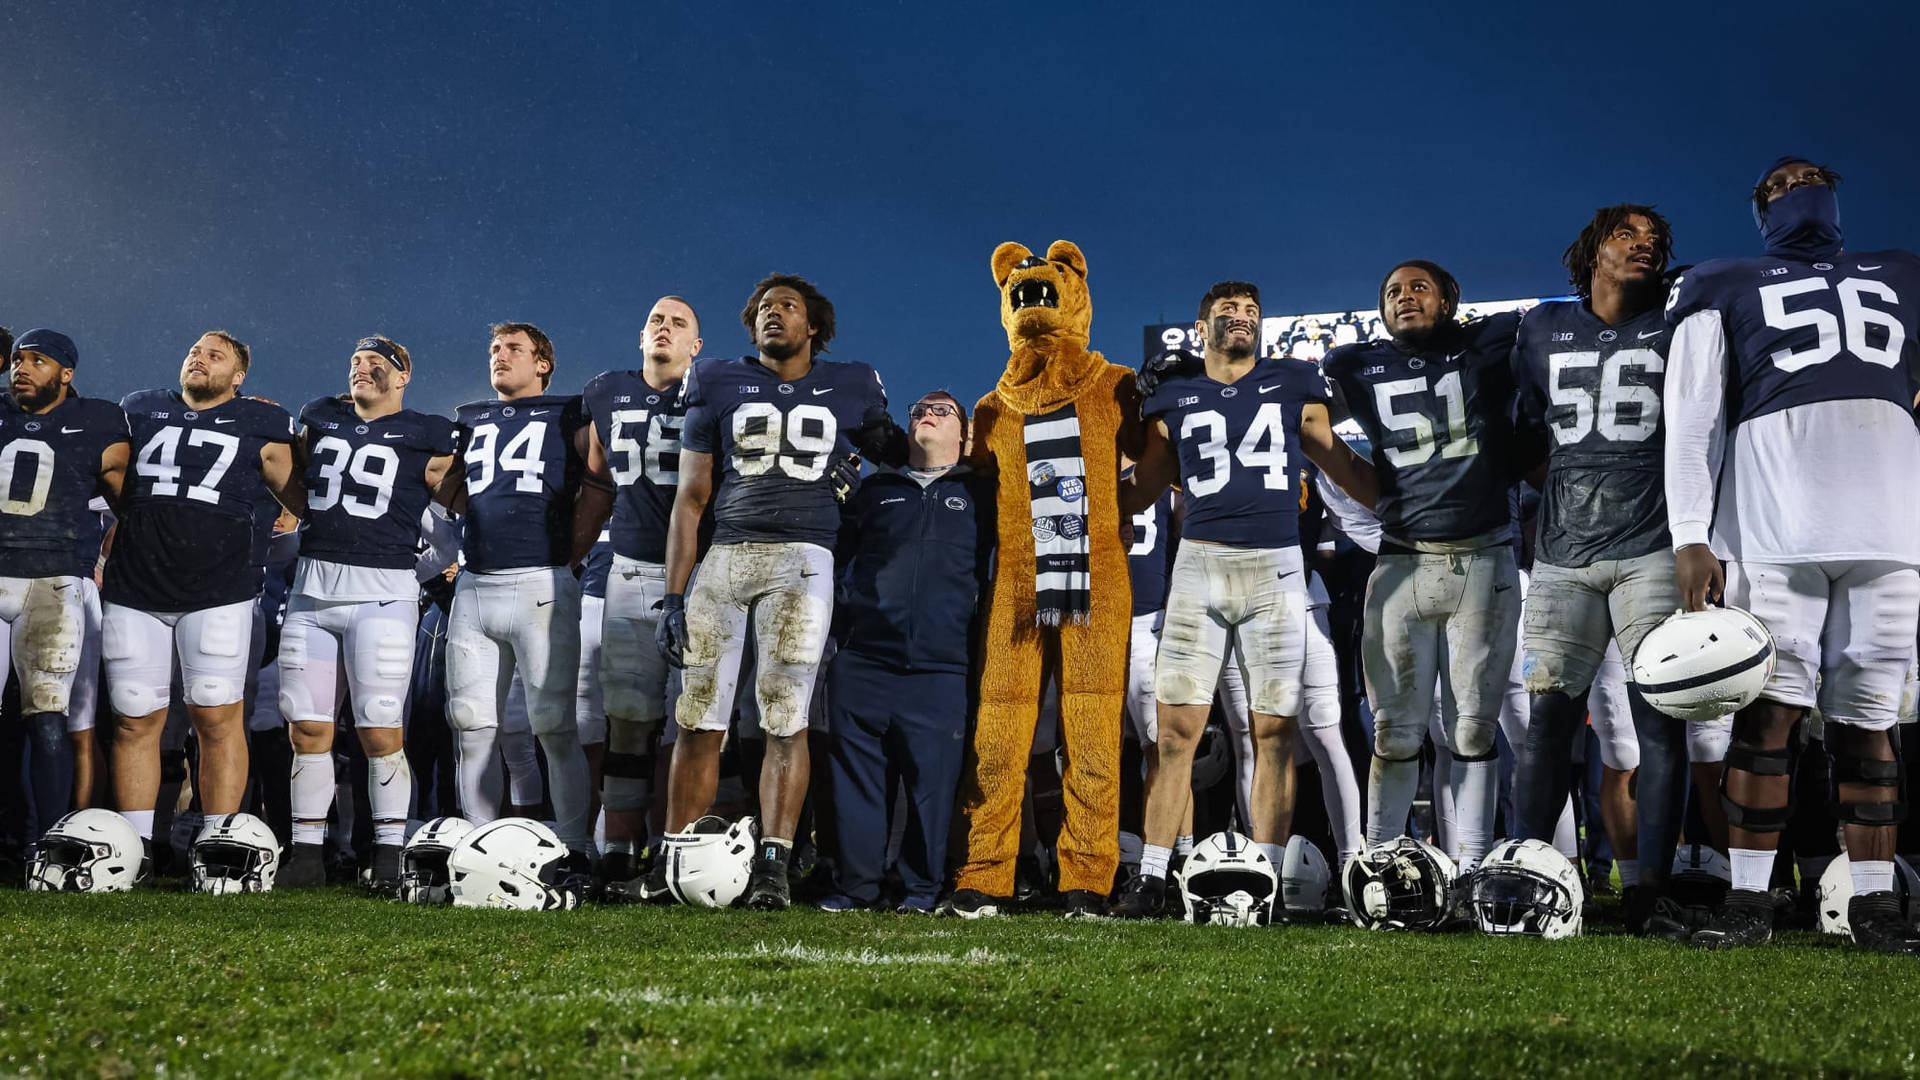 Penn State Football Players Pose For A Photo Wallpaper